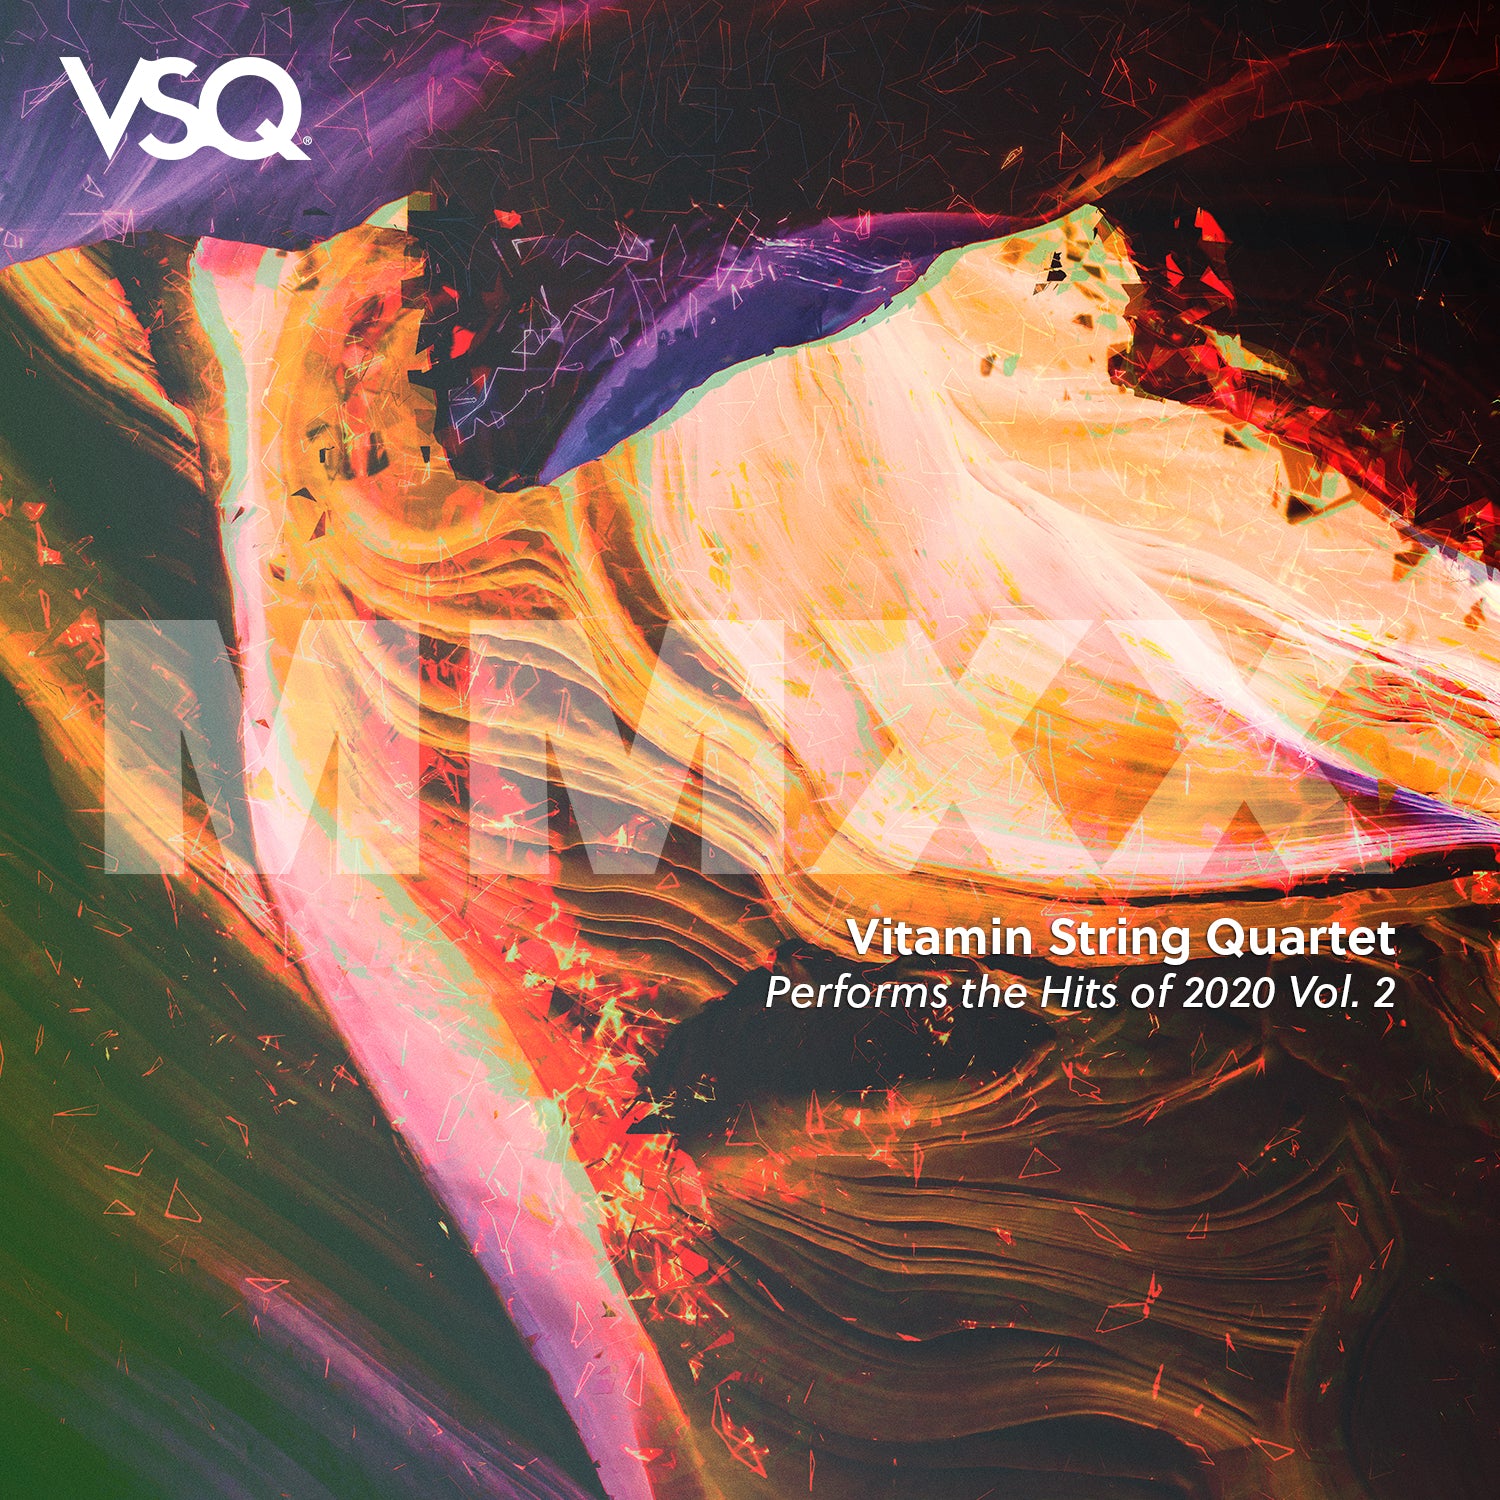 VSQ Performs the Hits of 2020, Vol. 2 Deluxe Edition